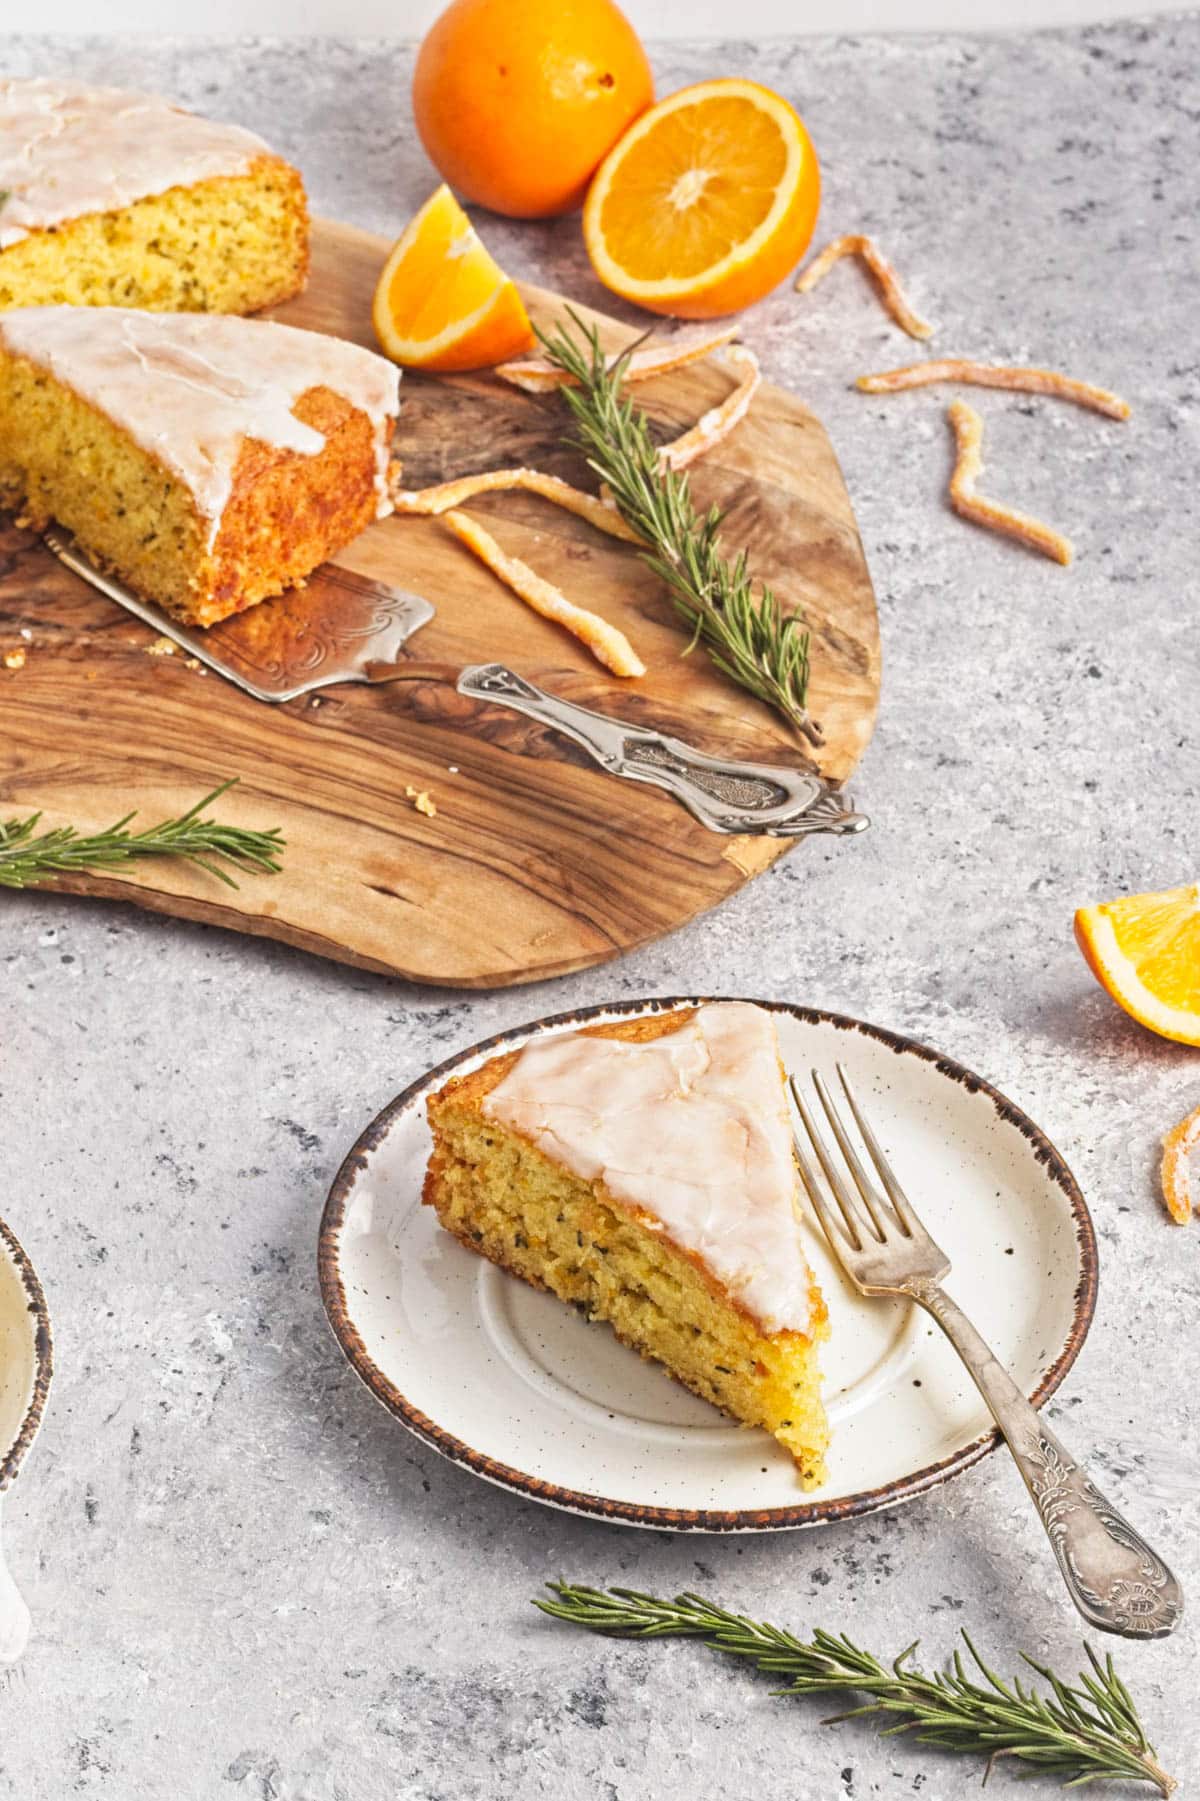 Orange olive oil cake with rosemary topped with icing and orange zest with oranges to the side.